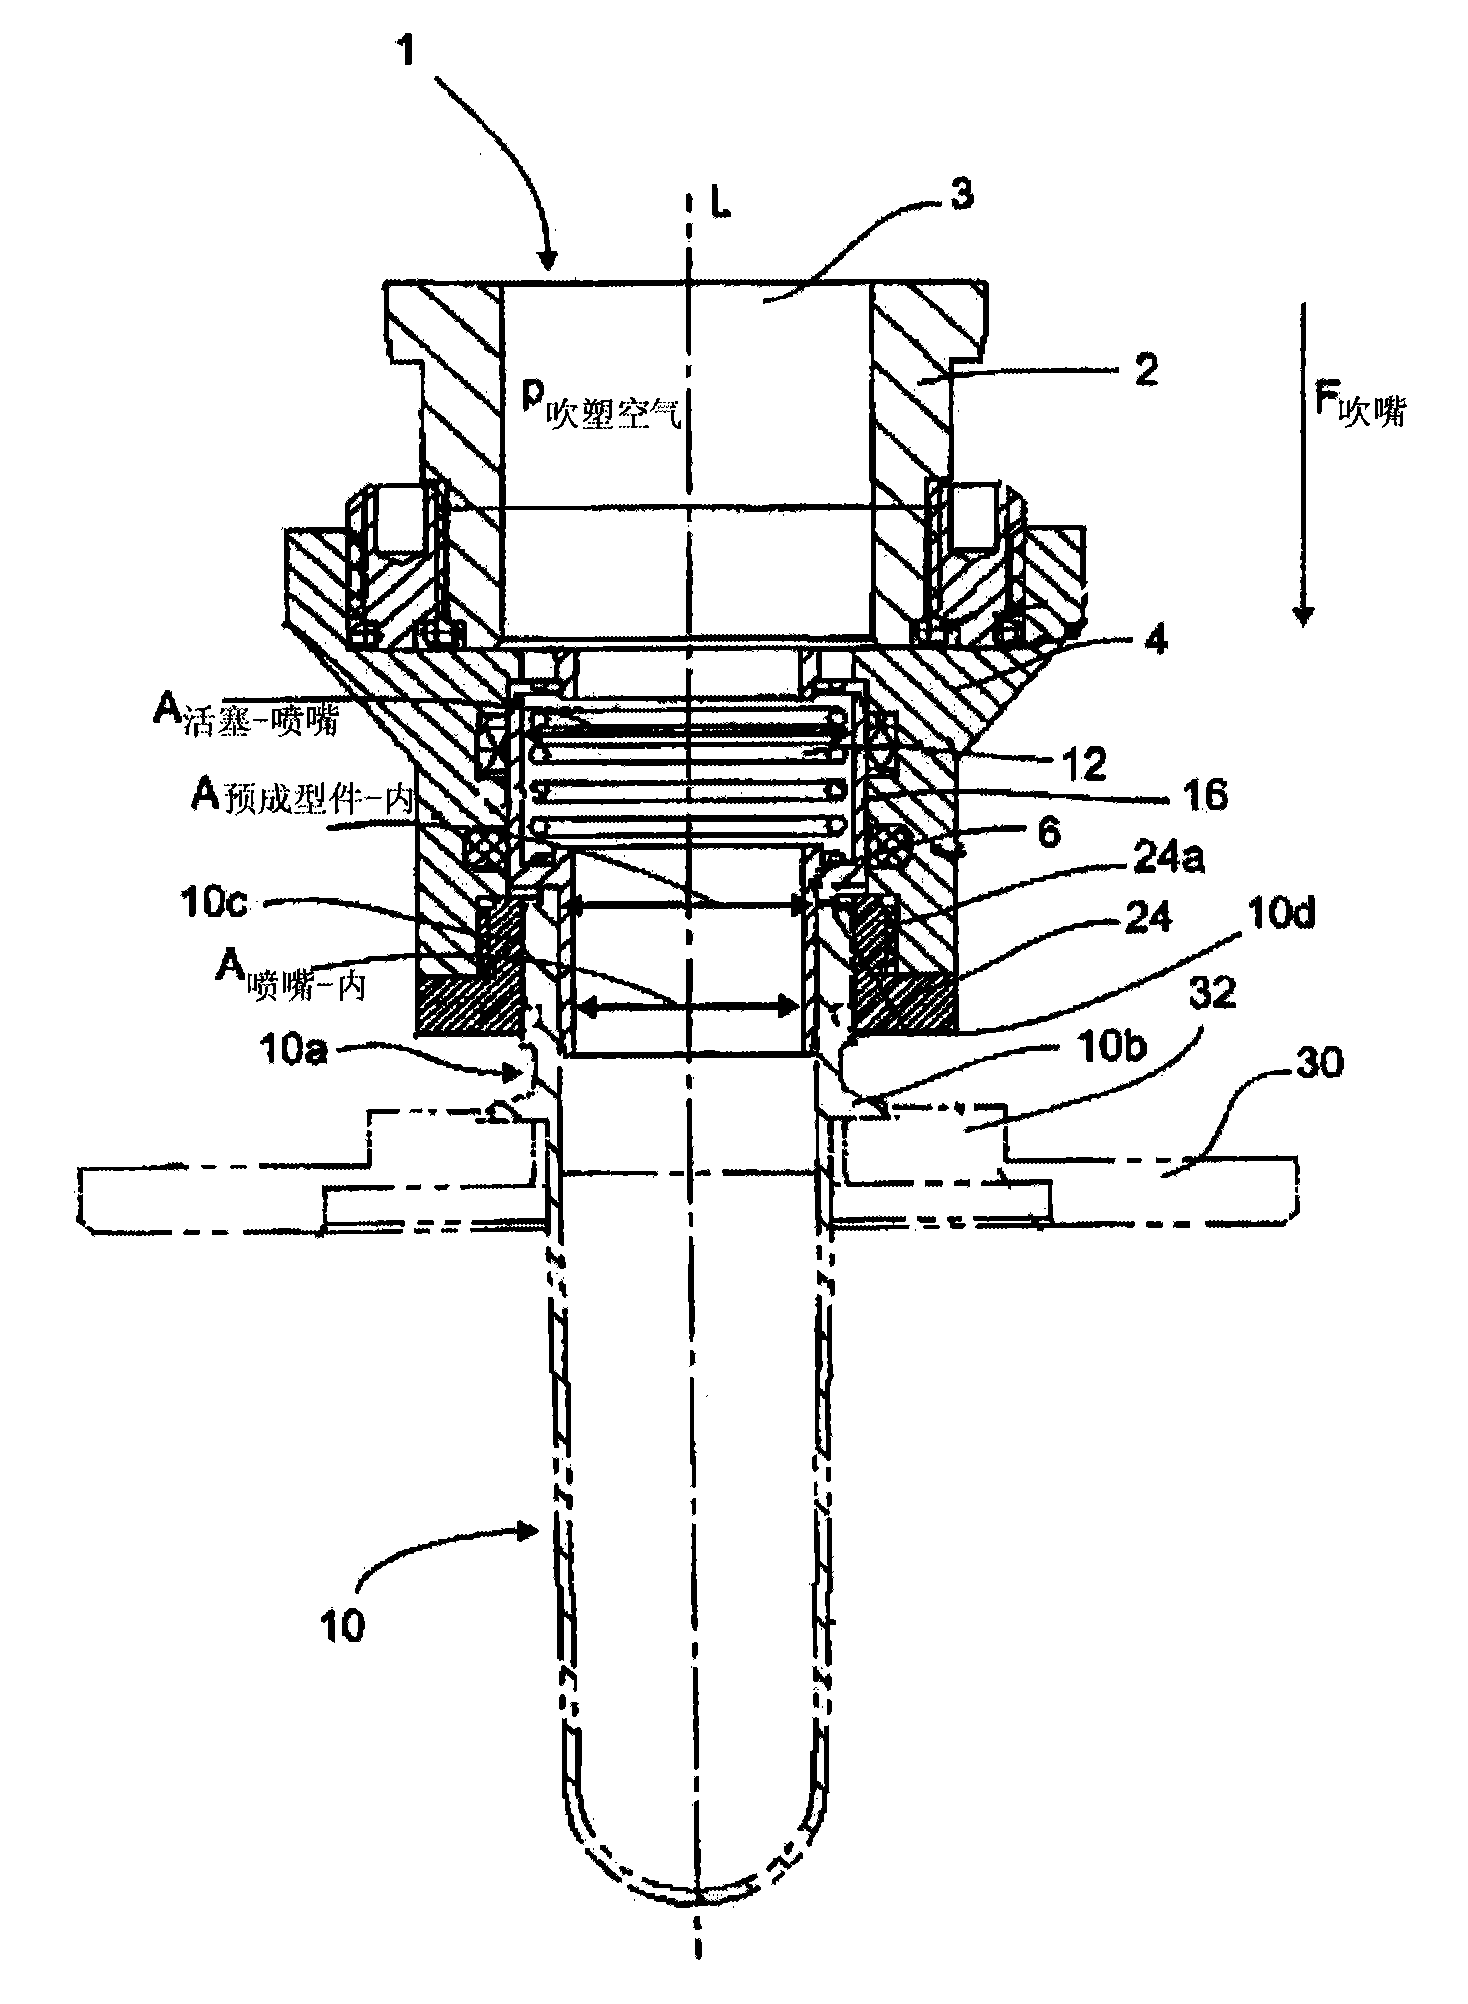 Blowing apparatus for expanding containers